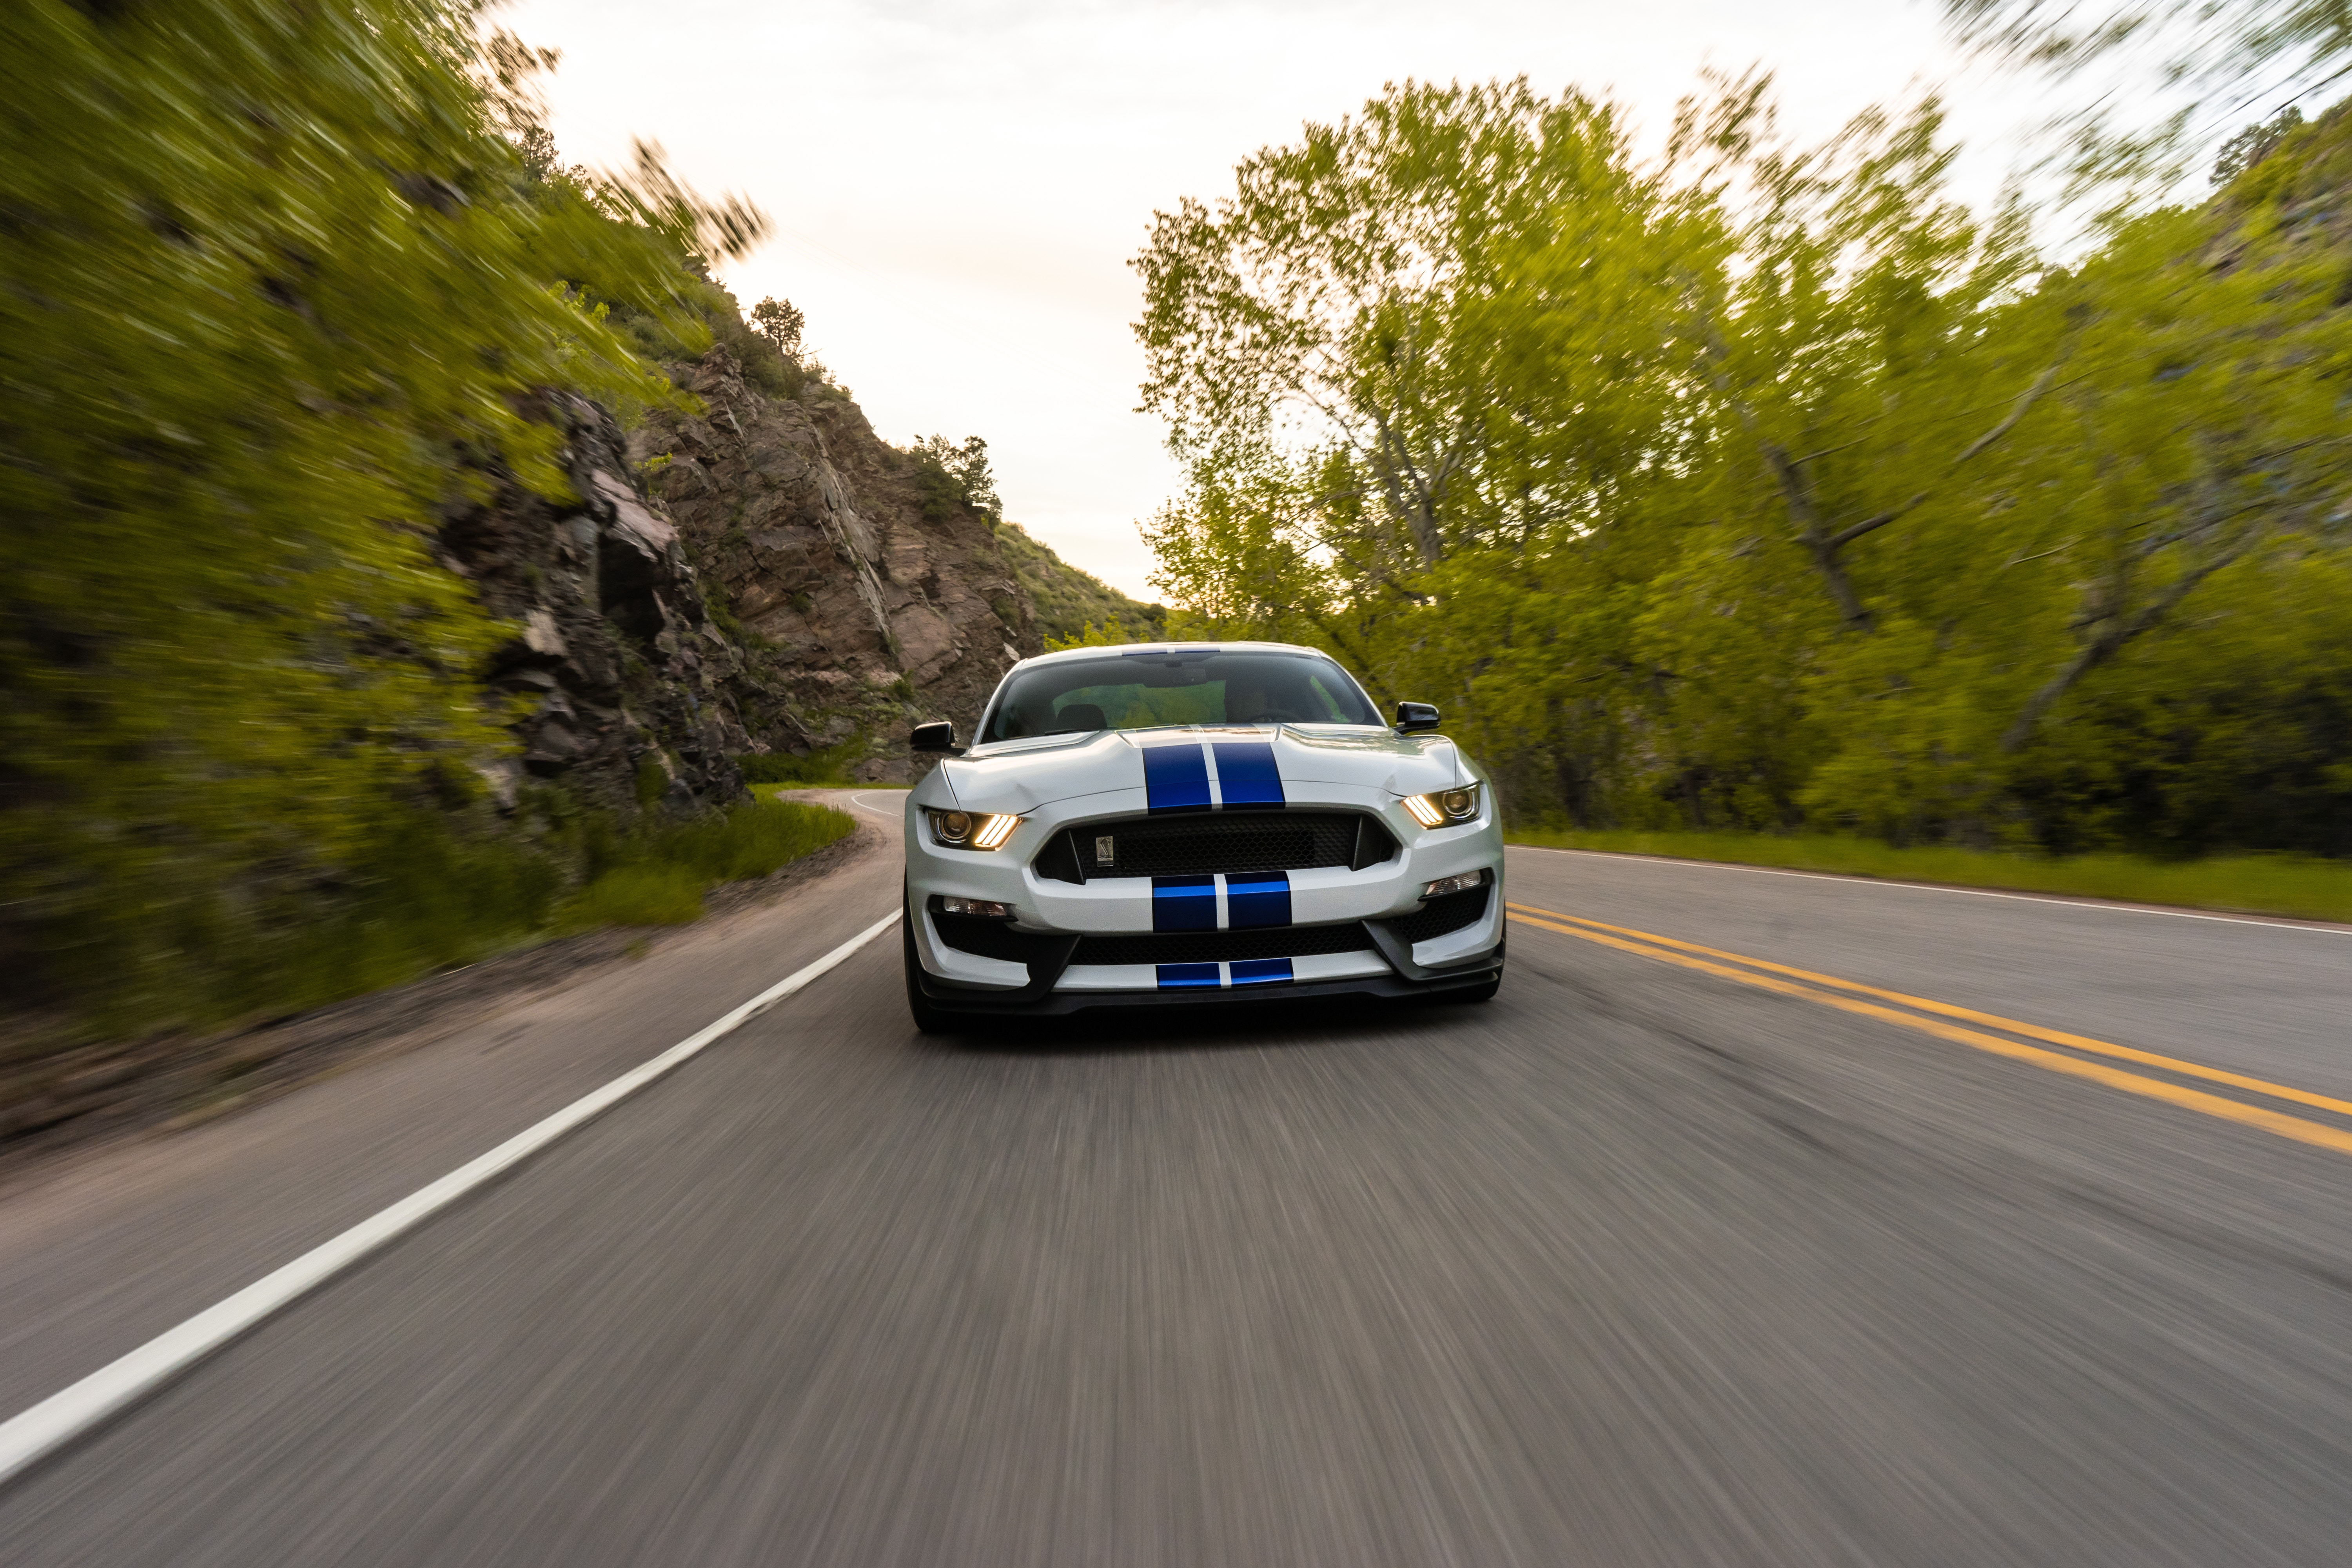 vertical wallpaper cars, sports car, ford mustang gt350, car, sports, ford, road, machine, speed